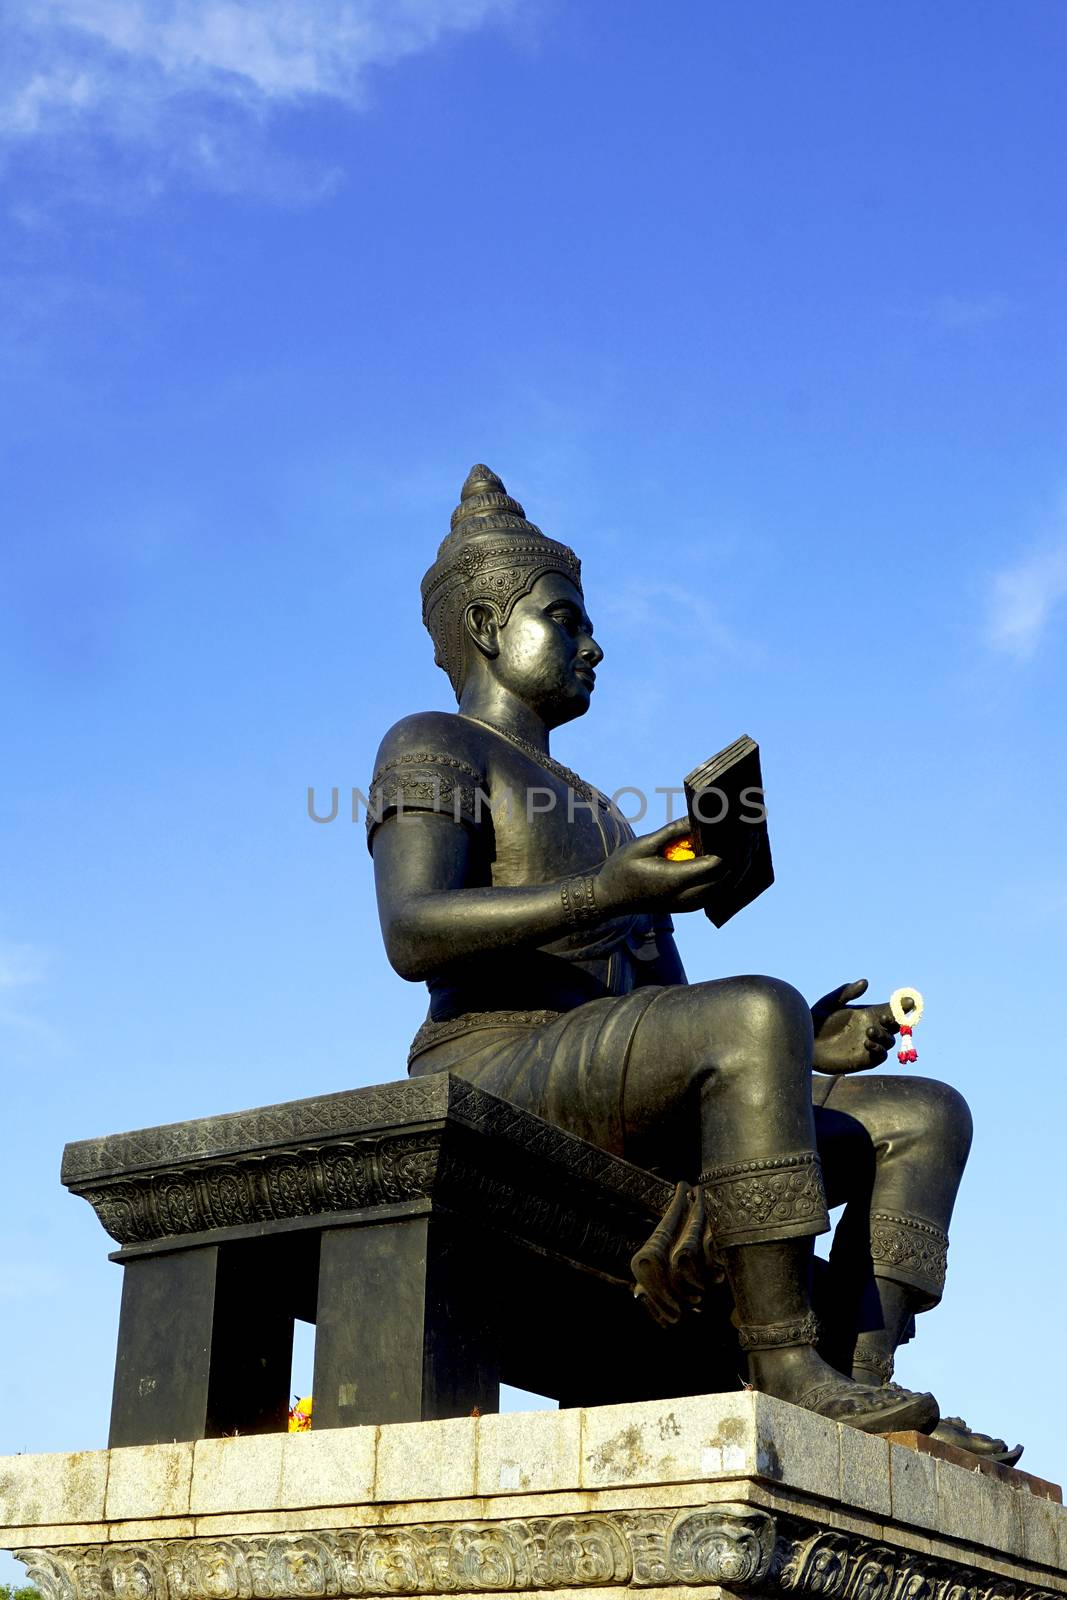 king of sukhothai statue side view in Historical park vertical